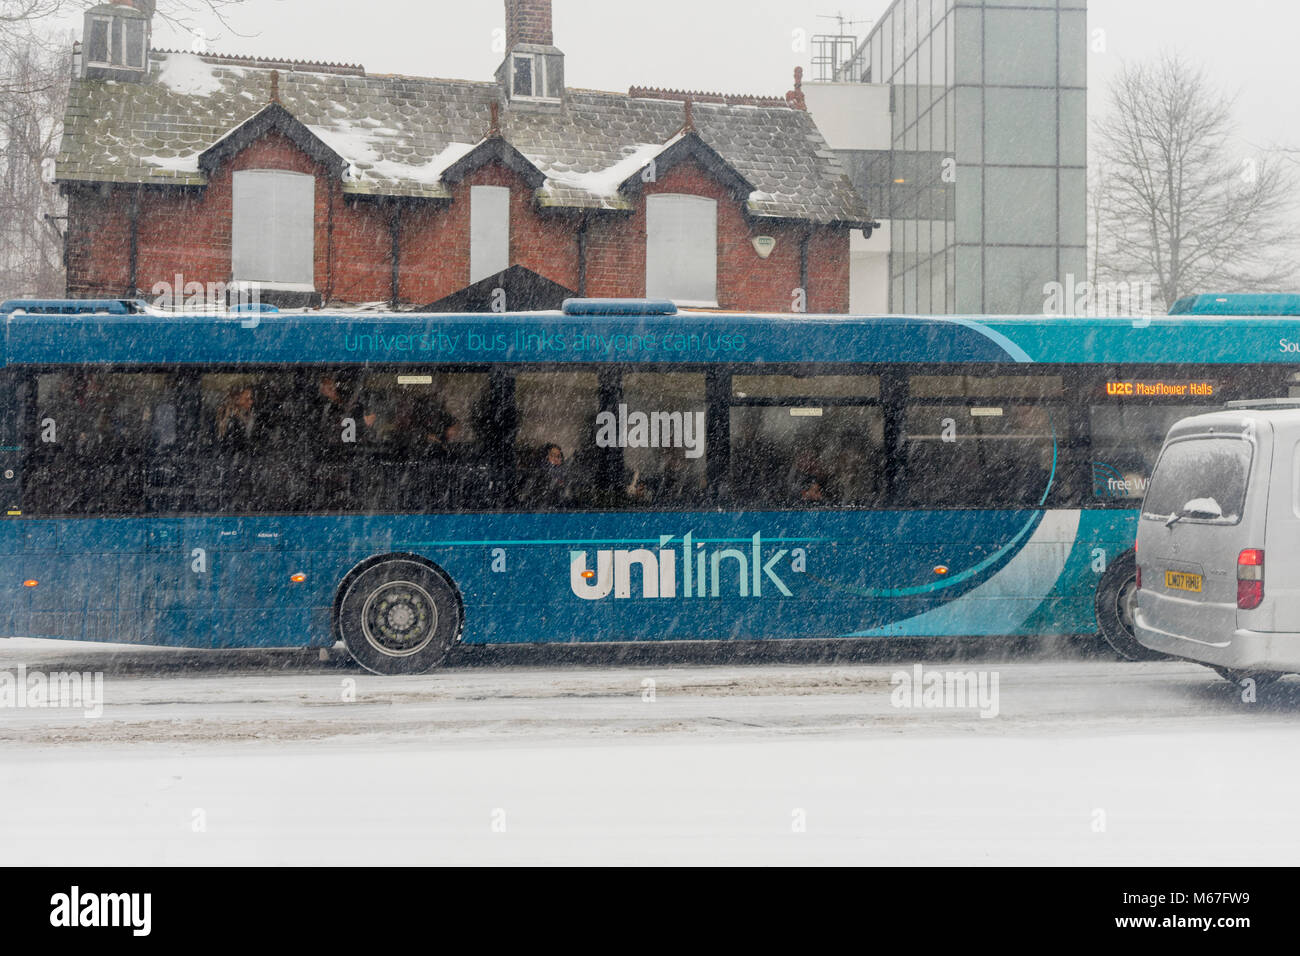 Southampton, UK. 1st of March 2018. Heavy snow has caused the University of Southampton (England, UK) to shut down for business for the rest of the day as well as tomorrow due to adverse and hazardous weather conditions. Pictured here is a Unilink bus driving along University Road at Highfield Campus during heavy snowfall. Stock Photo